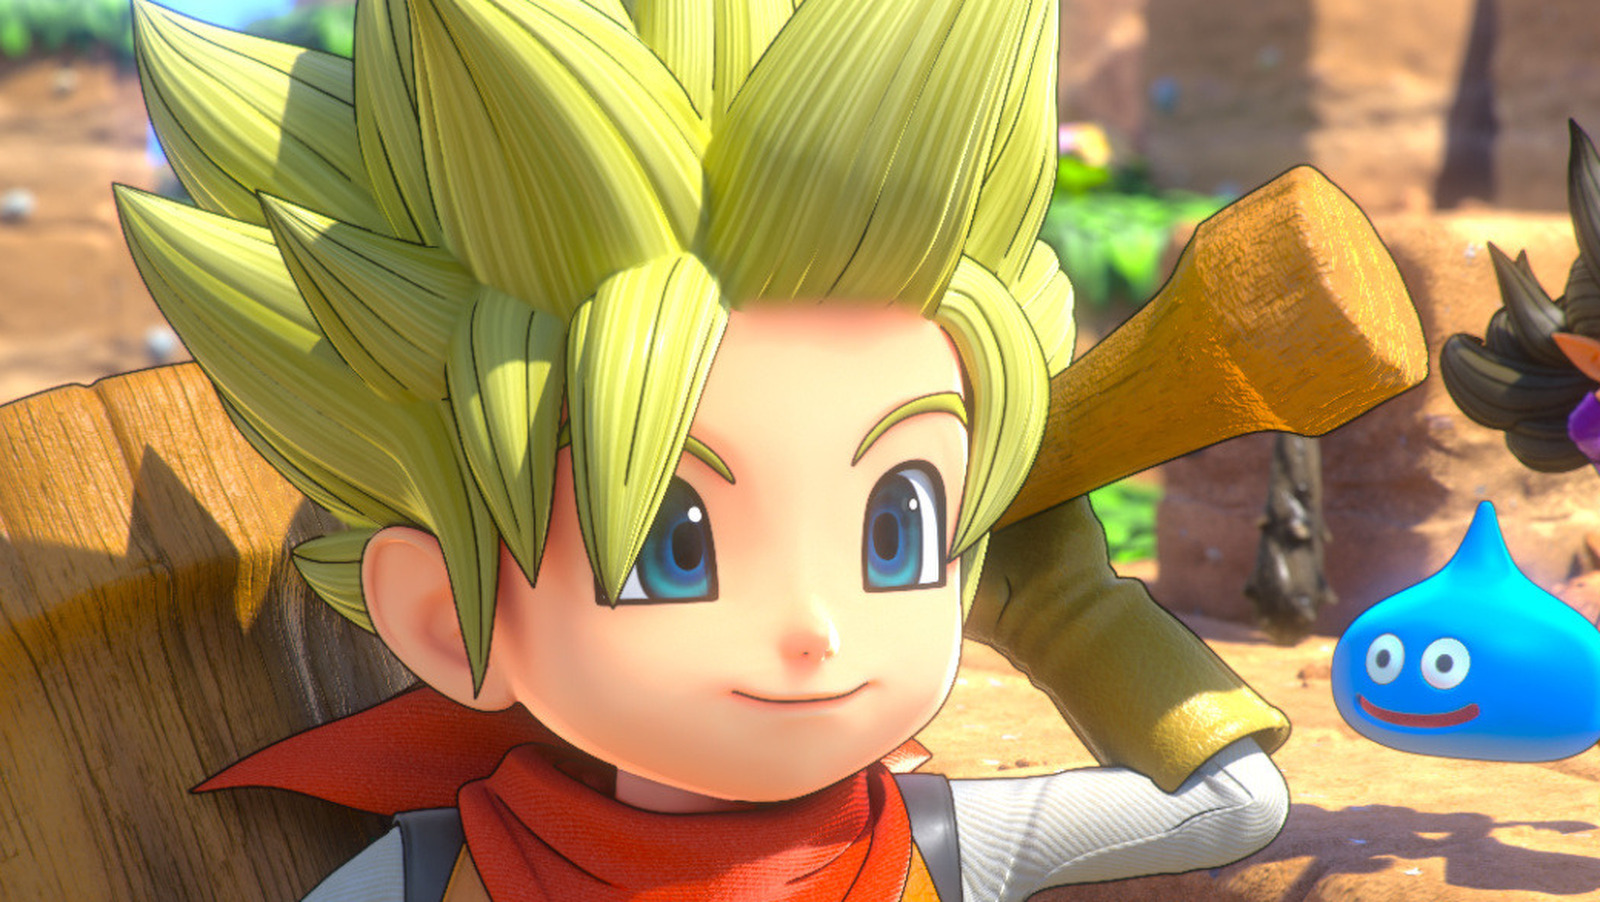 Dragon Quest Builders 3 When Will We Get A Sequel?